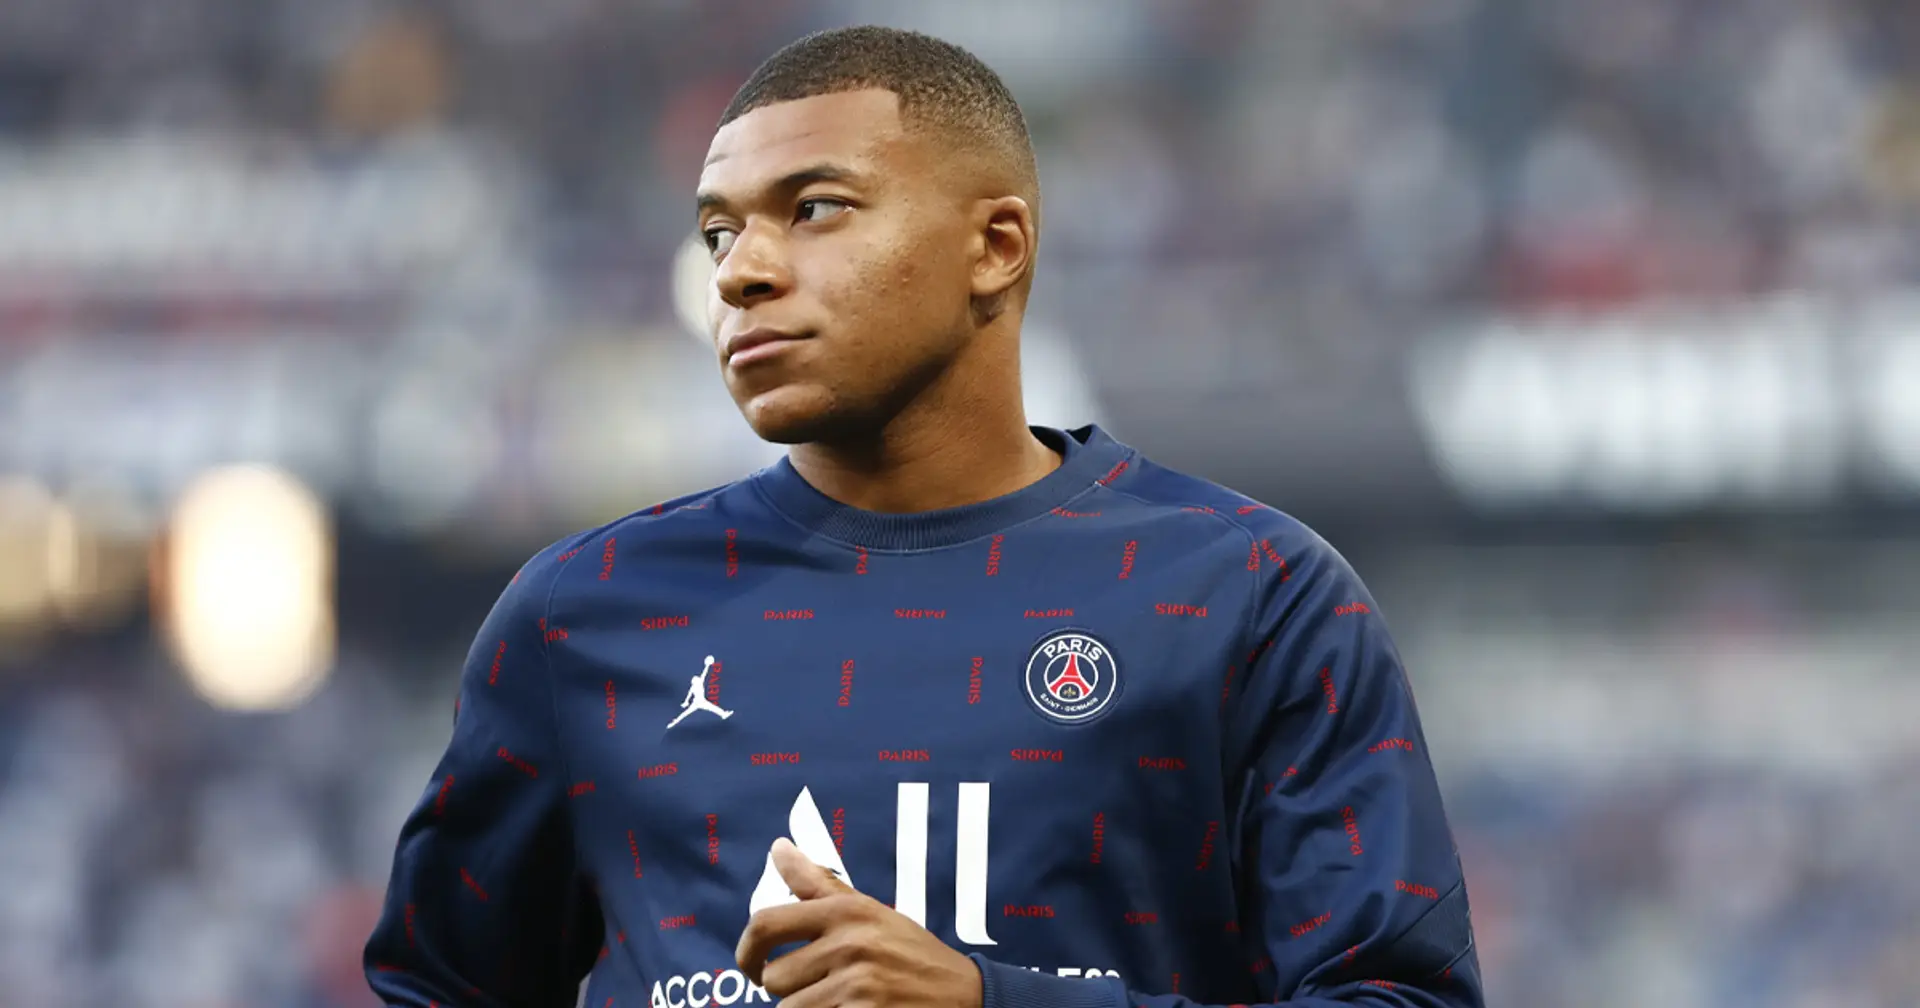 Kylian Mbappe to Liverpool & 3 more transfer rumours you should believe the least right now